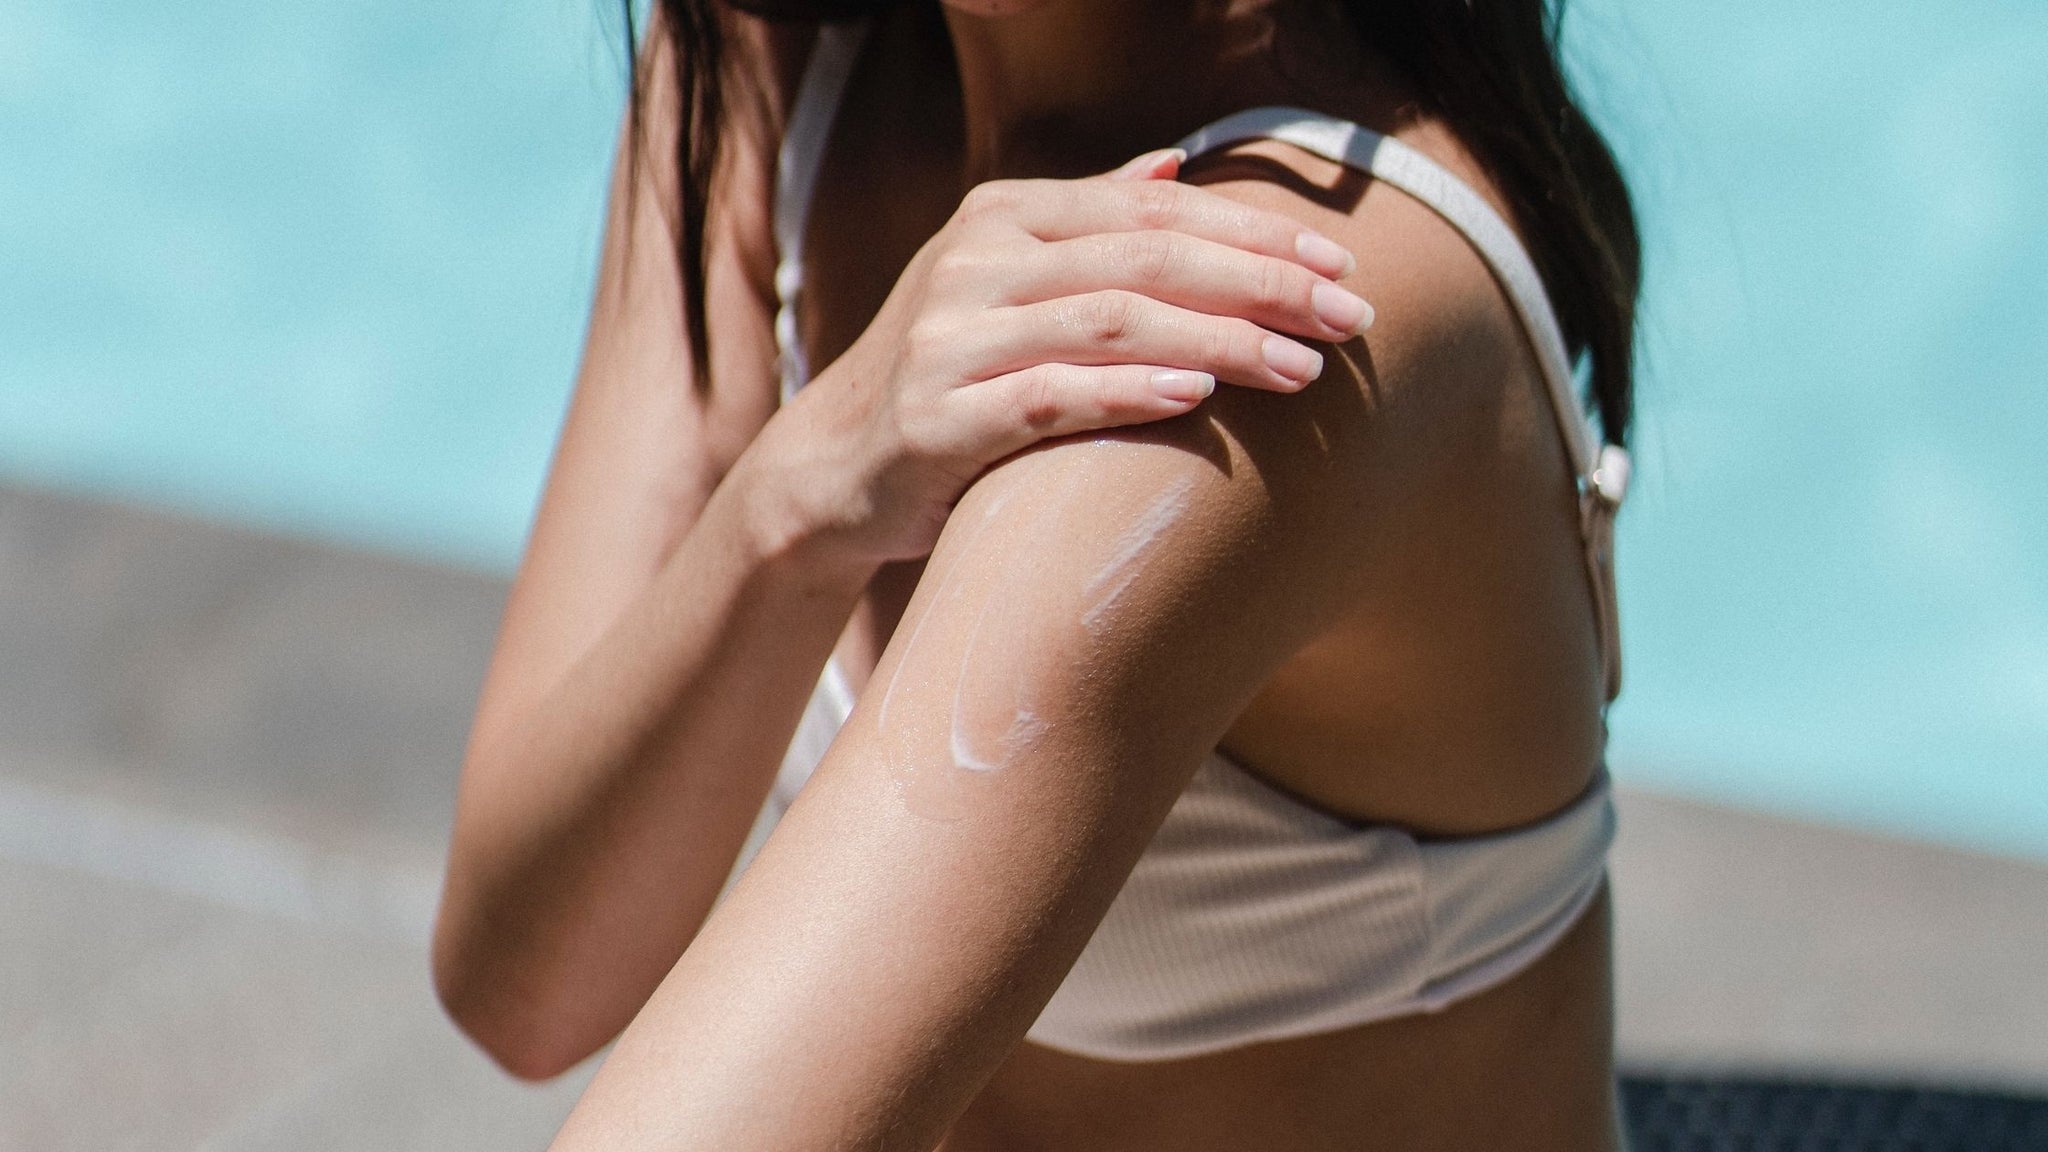 What should sunscreen for oily skin look like?